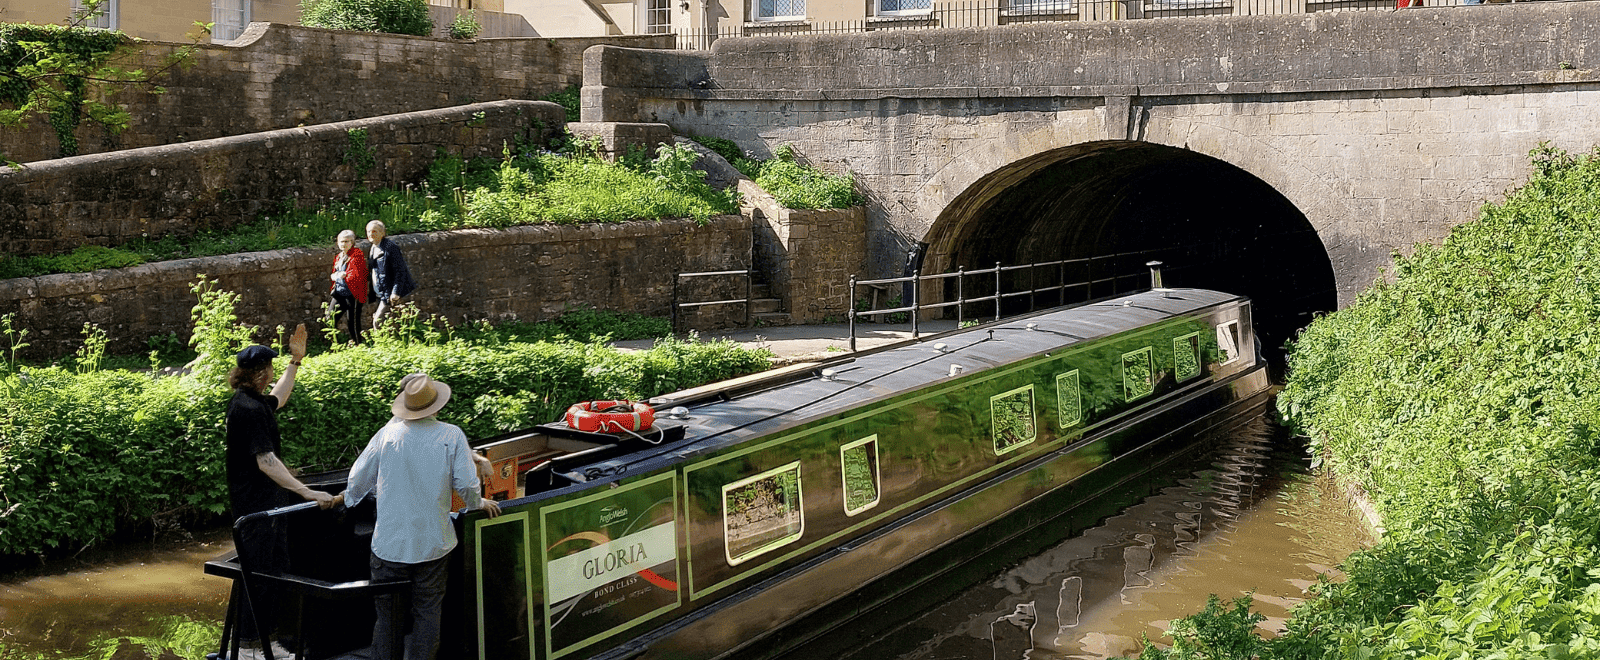 Canal boat holidays on the Kennet & Avon Canal in Bath